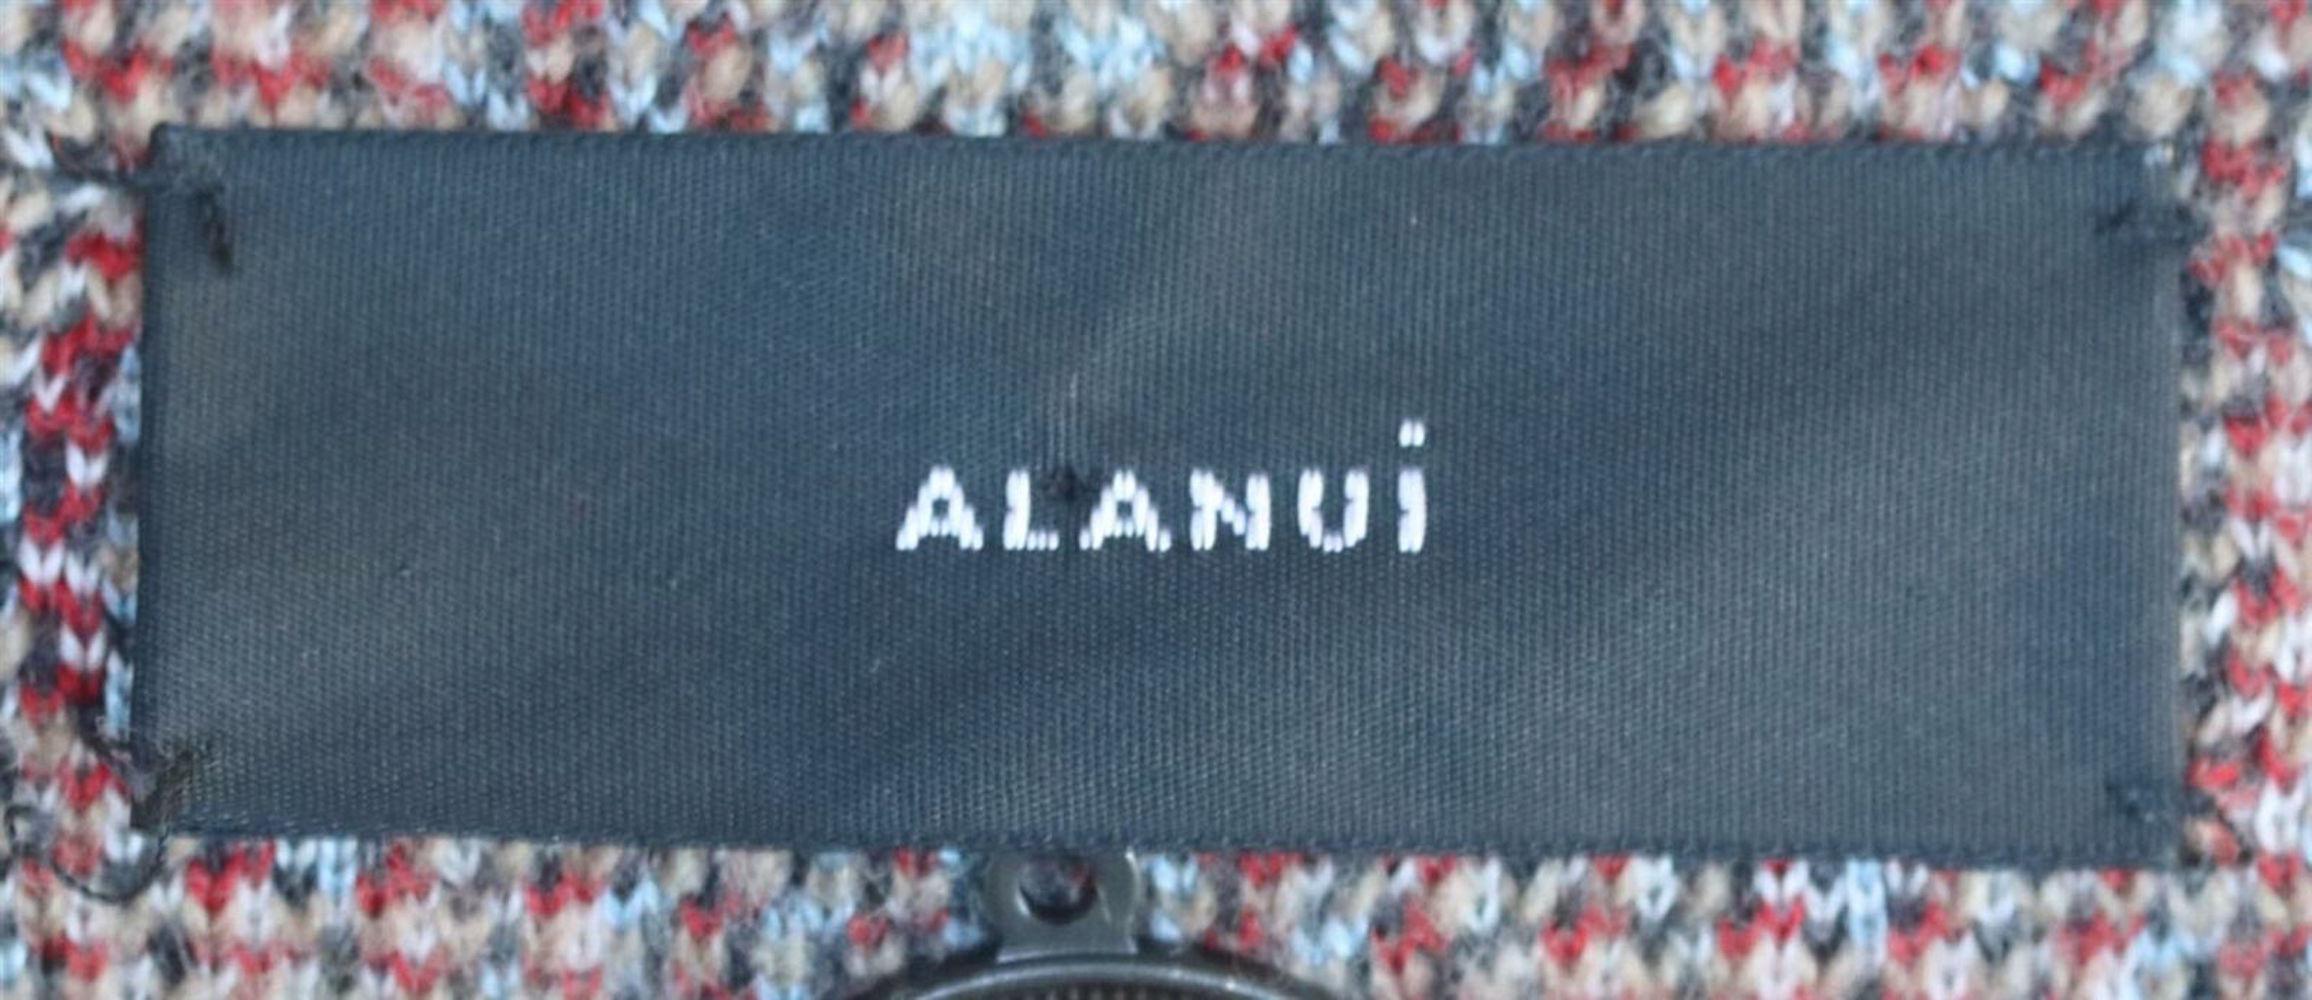 Alanui Animalier Belted Fringed Wool Blend Jacquard Cardigan In Excellent Condition In London, GB